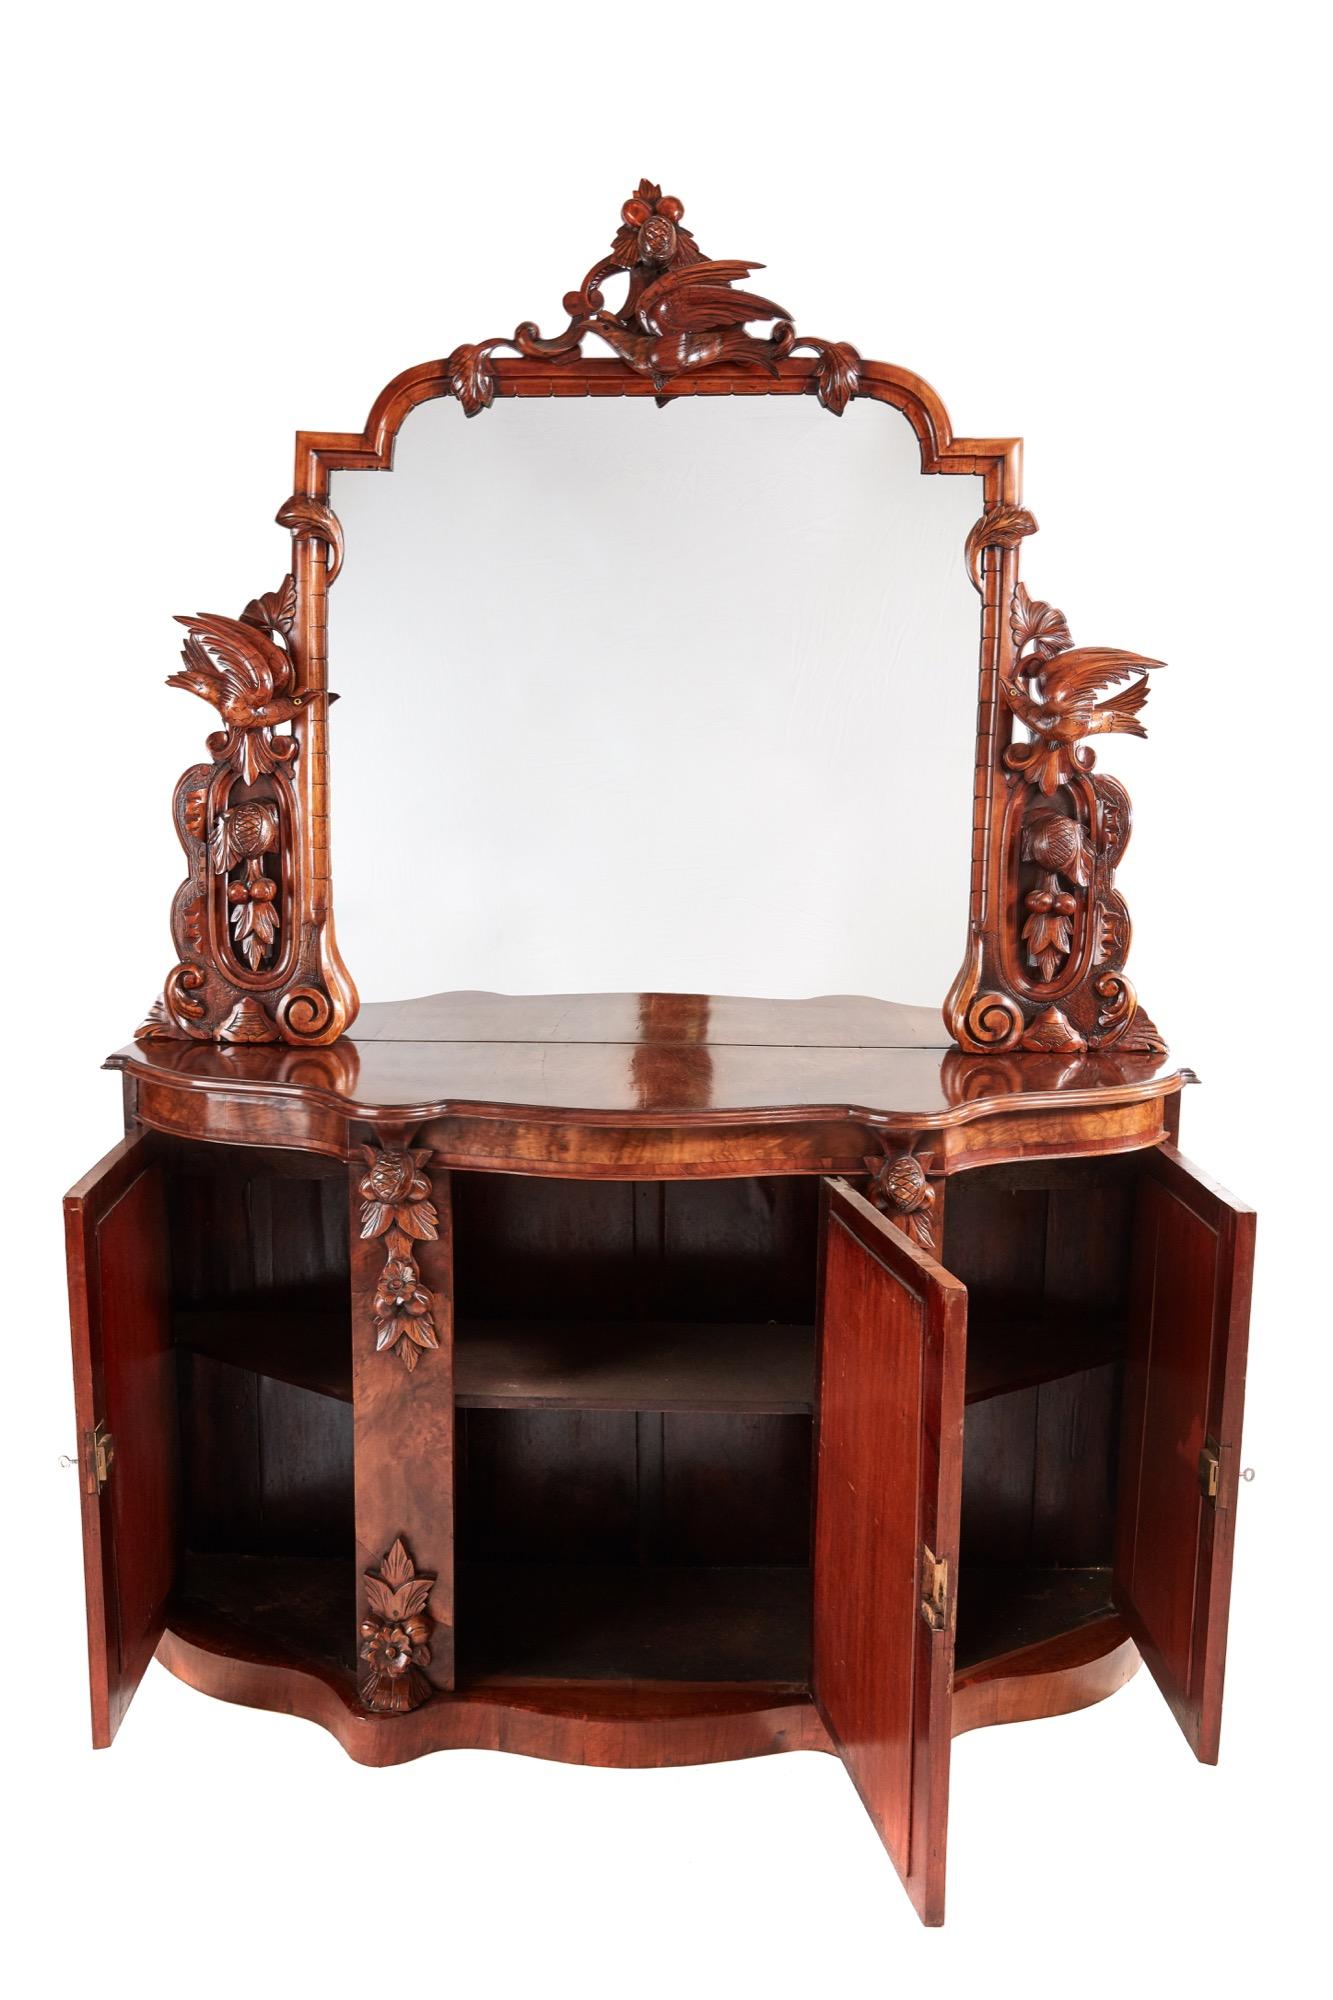 An outstanding 19th century Victorian antique carved mirrored walnut credenza with a magnificent carved solid walnut mirror back and spectacular carvings and moulded edges. The serpentine shaped base has a delightful burr walnut top thumb moulded